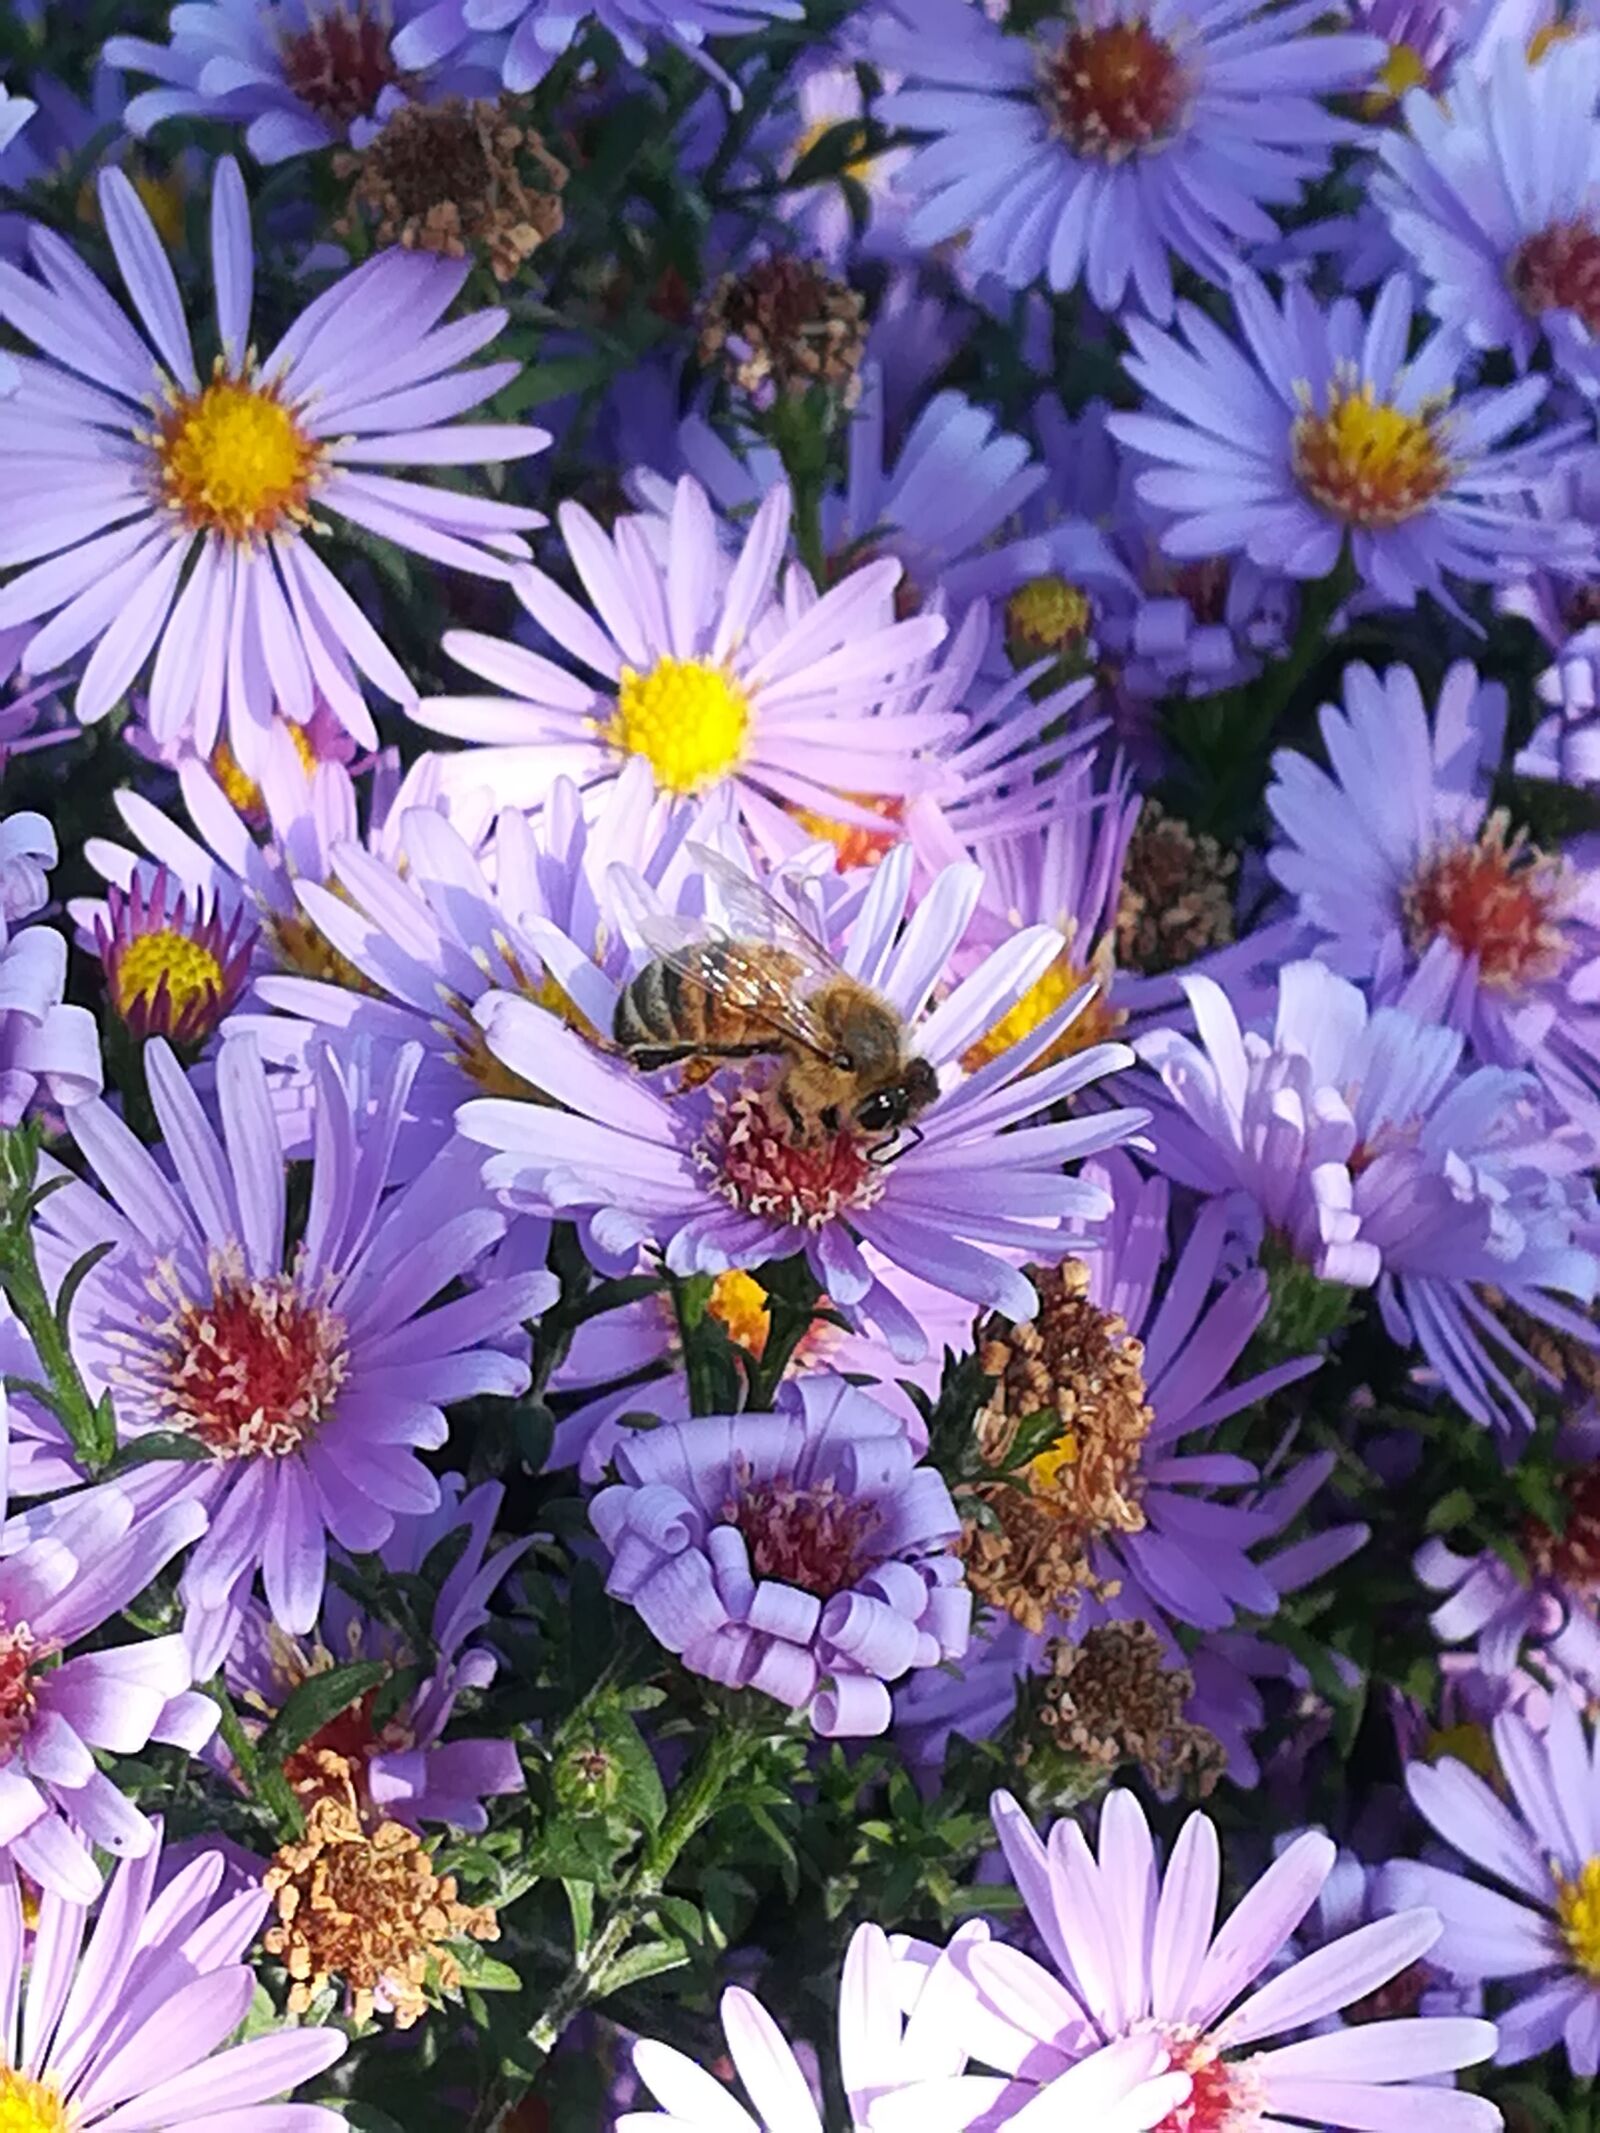 HUAWEI P8 lite 2017 sample photo. Flowers, bee, asters photography